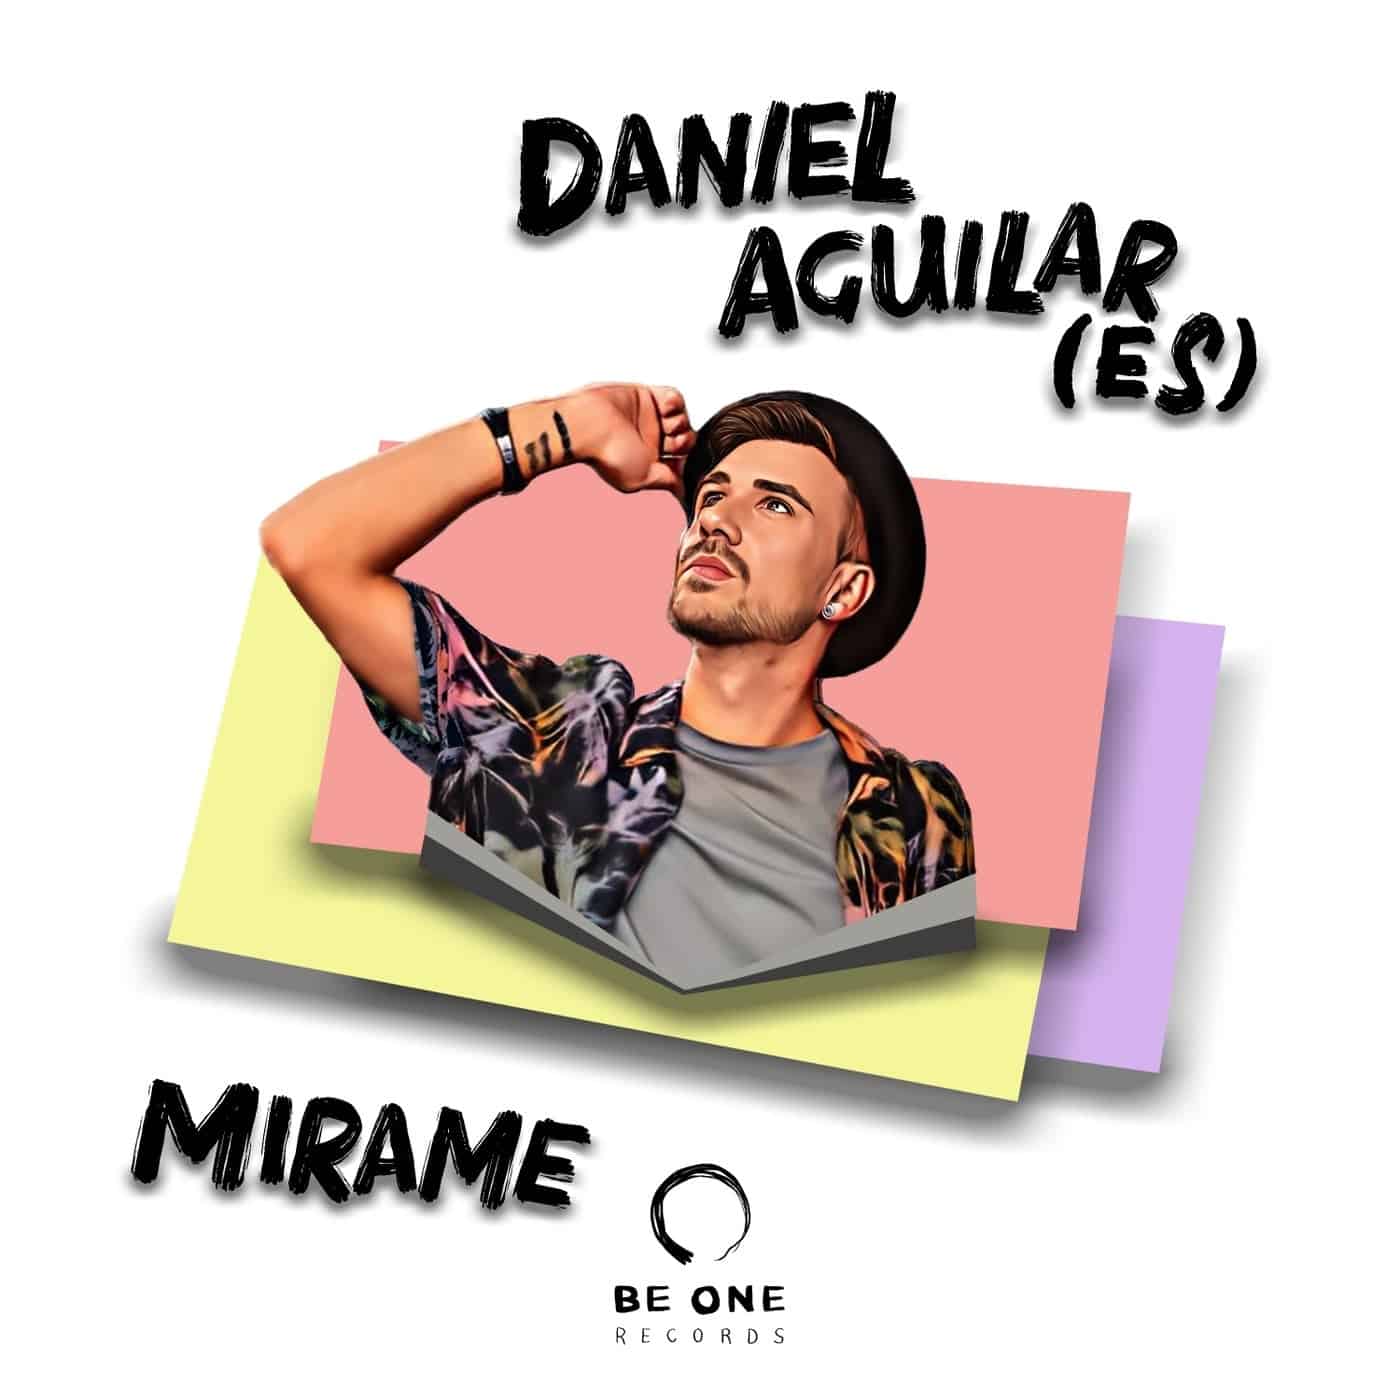 image cover: Daniel Aguilar (ES) - Mírame on Be One Records